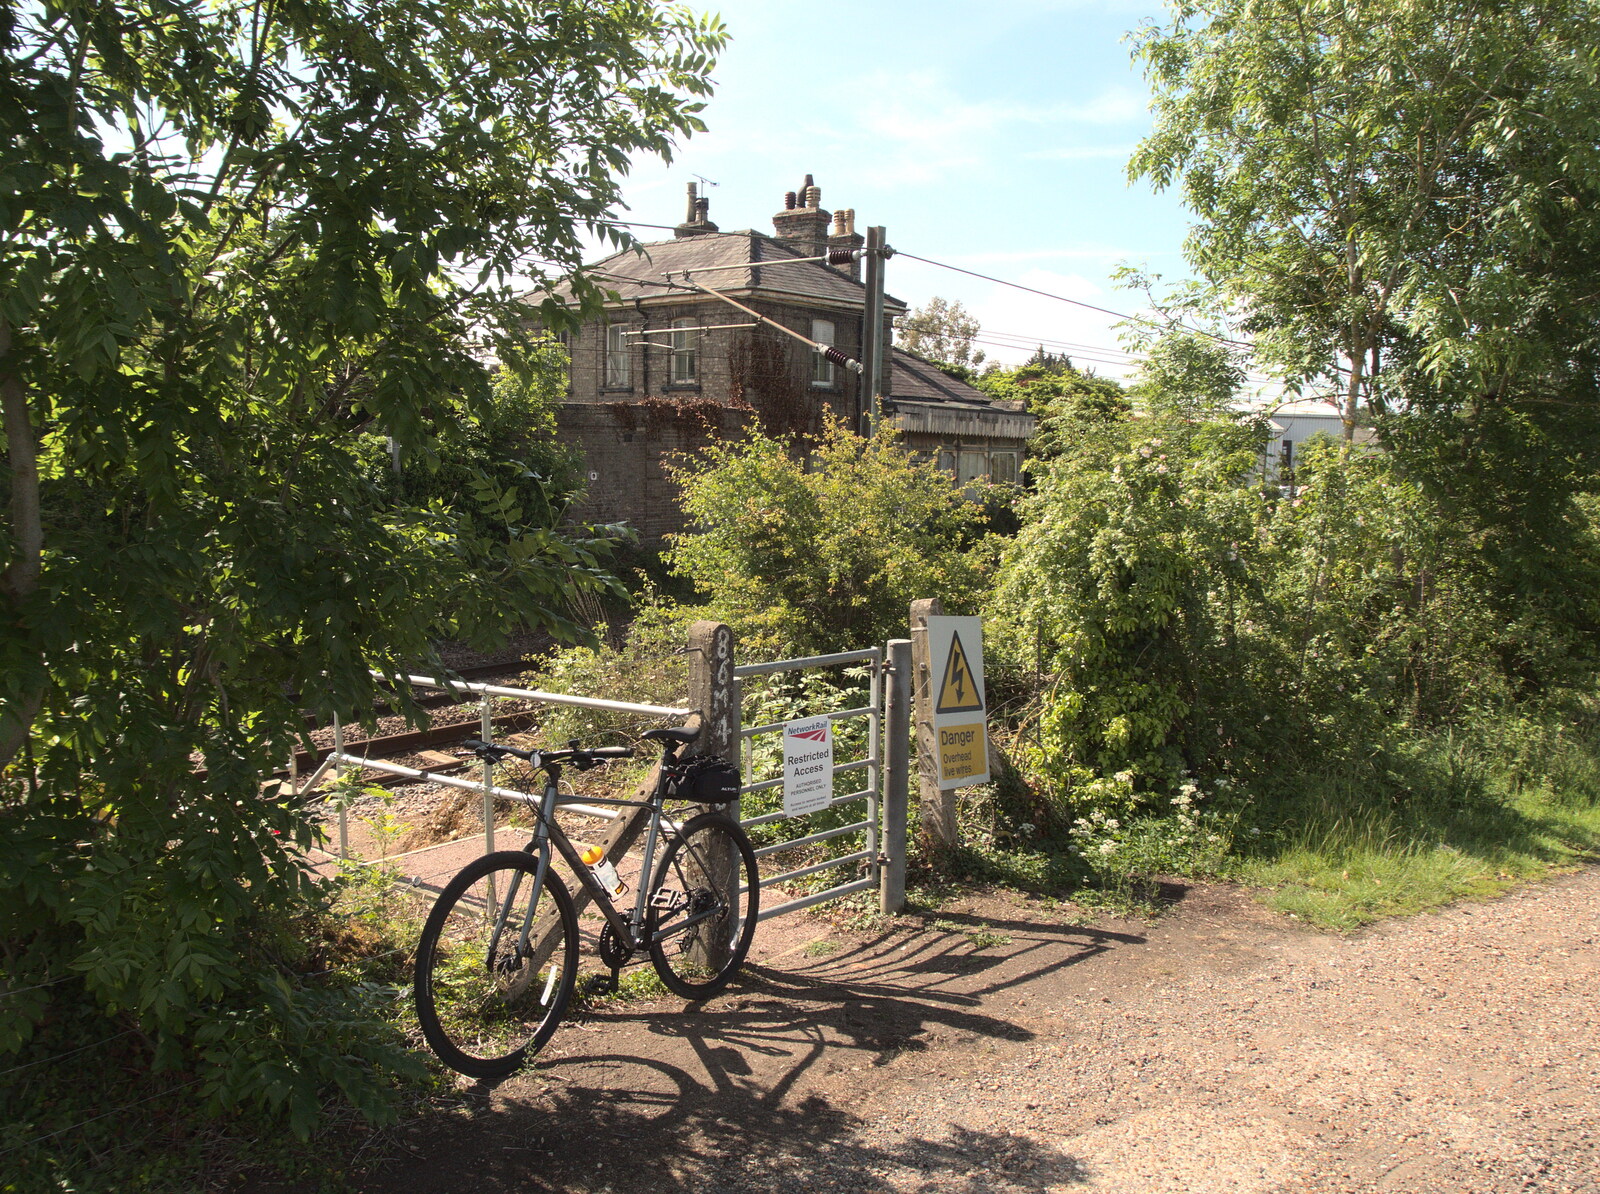 A Bike Ride Miscellany, Brome to Cotton, Suffolk - 6th June 2022: Nosher's bike near the old railway station